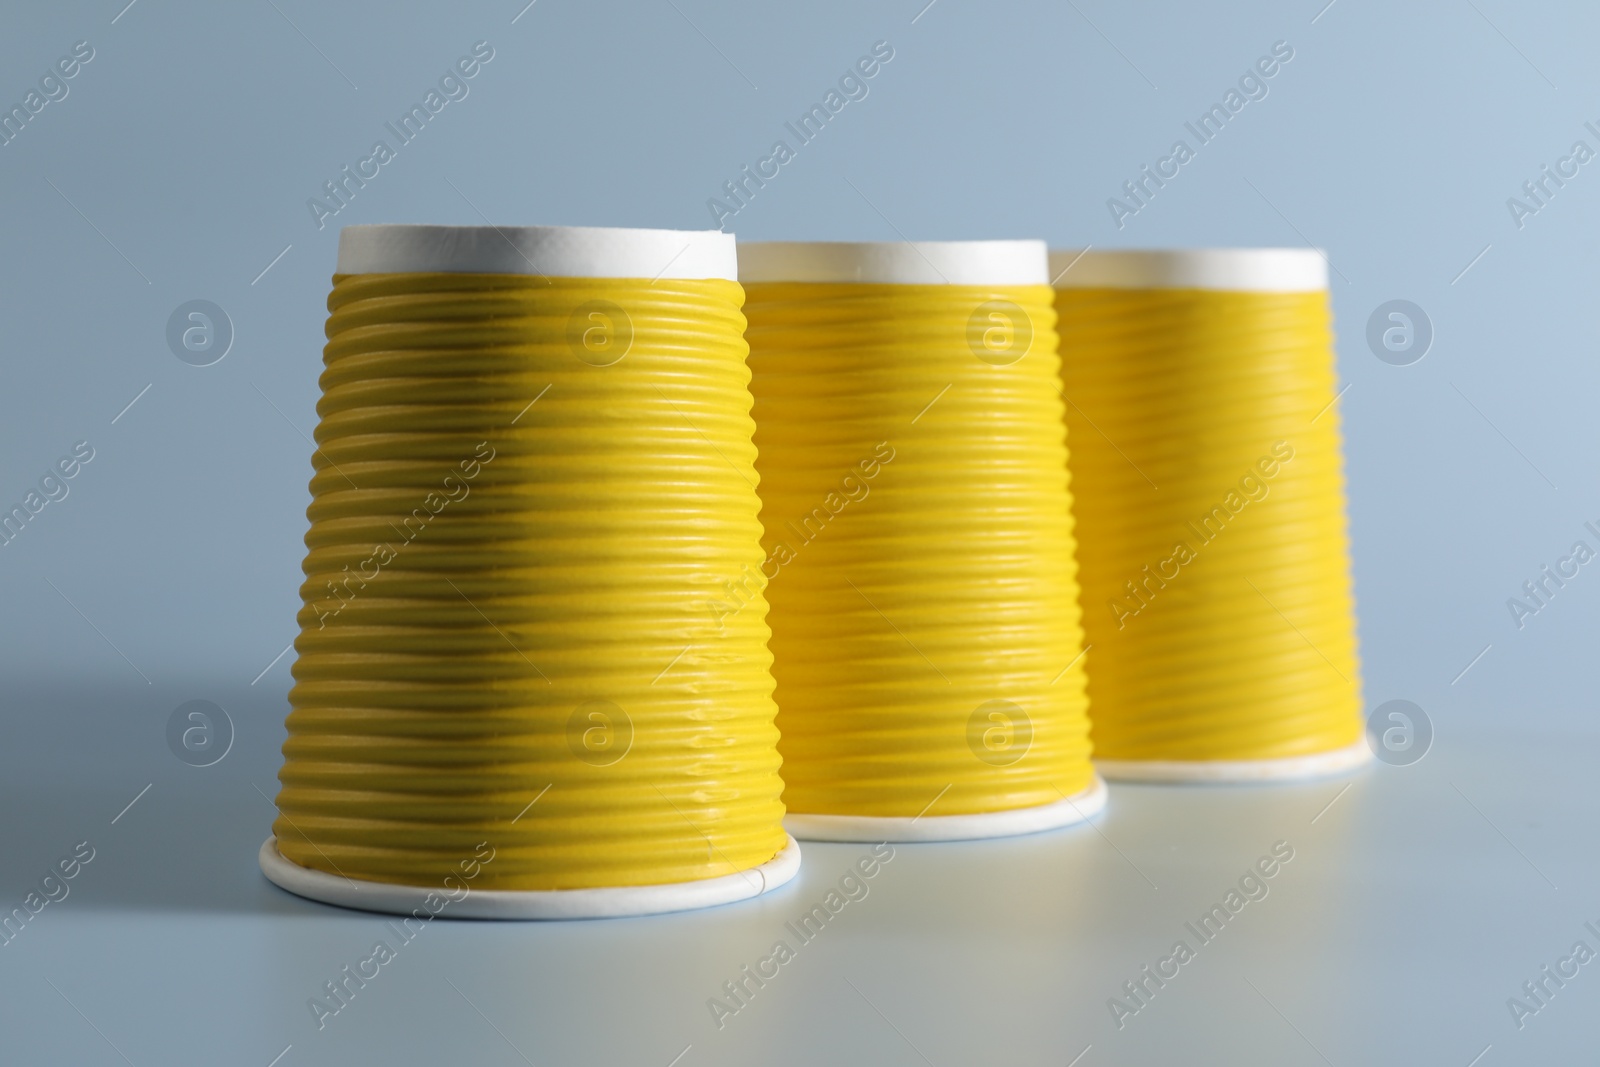 Photo of Shell game. Three yellow cups on light blue background